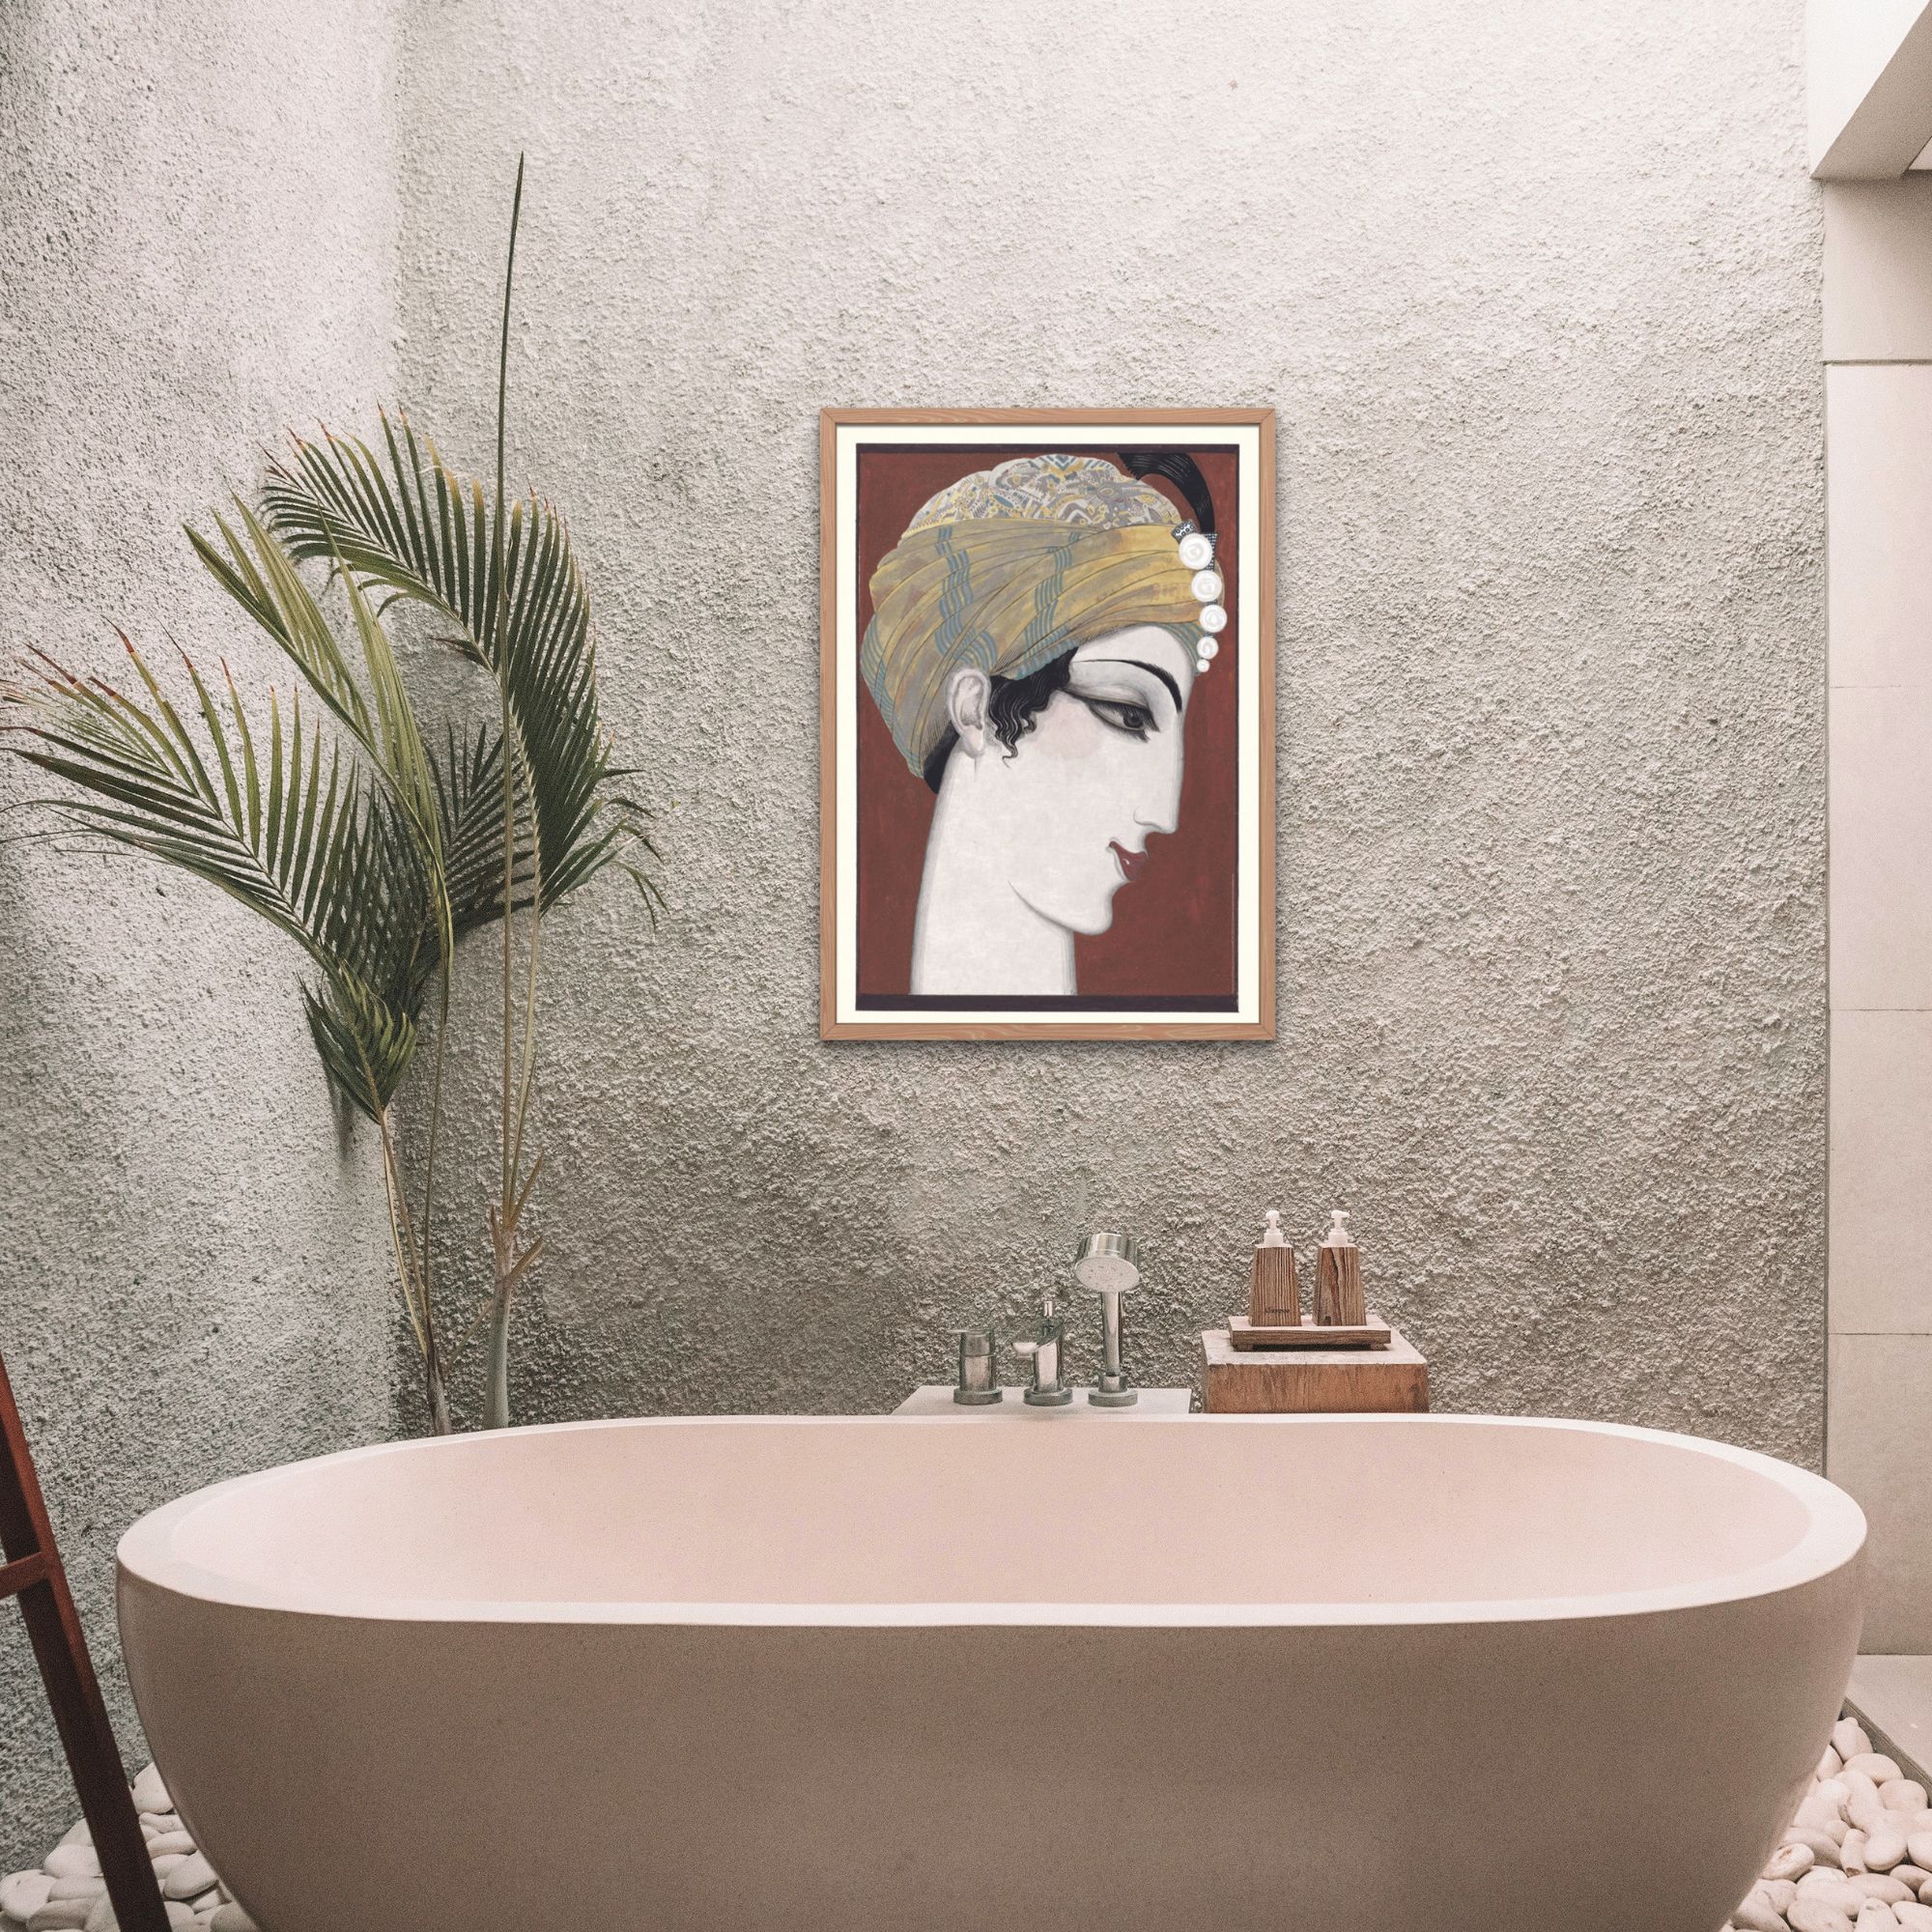 Art Deco portrait by Francois-Louis Schmied, showcasing a man in profile with an ornate turban and a sharp gaze, rendered in warm earth tones with meticulous detail, all beautifully framed in wood.